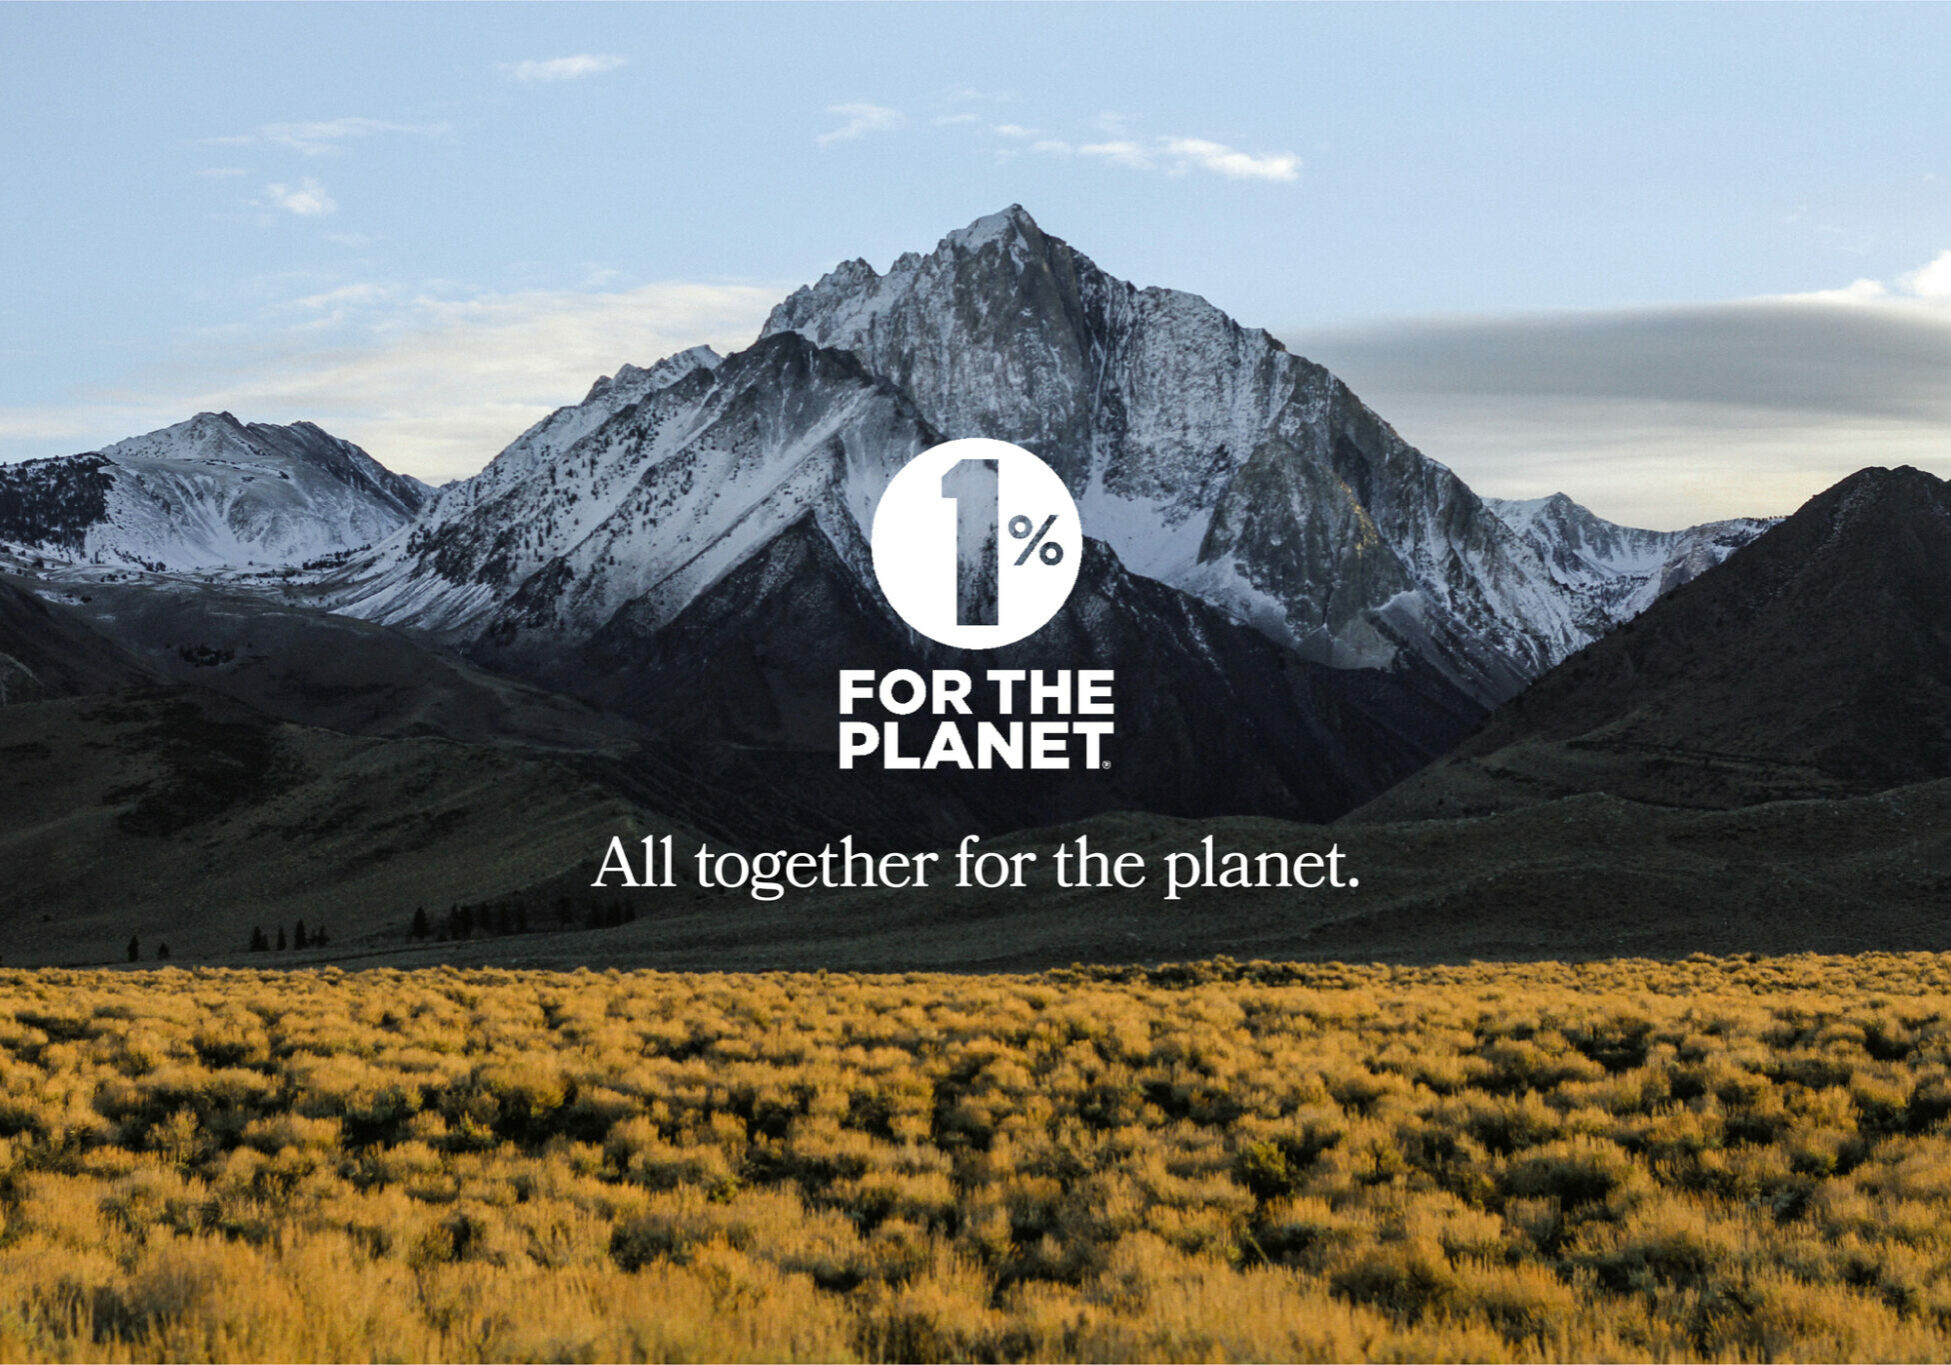 All Together For The Planet - Alpenglow Agency is a 1% for the Planet Certified WordPress web developer in Bend, Oregon